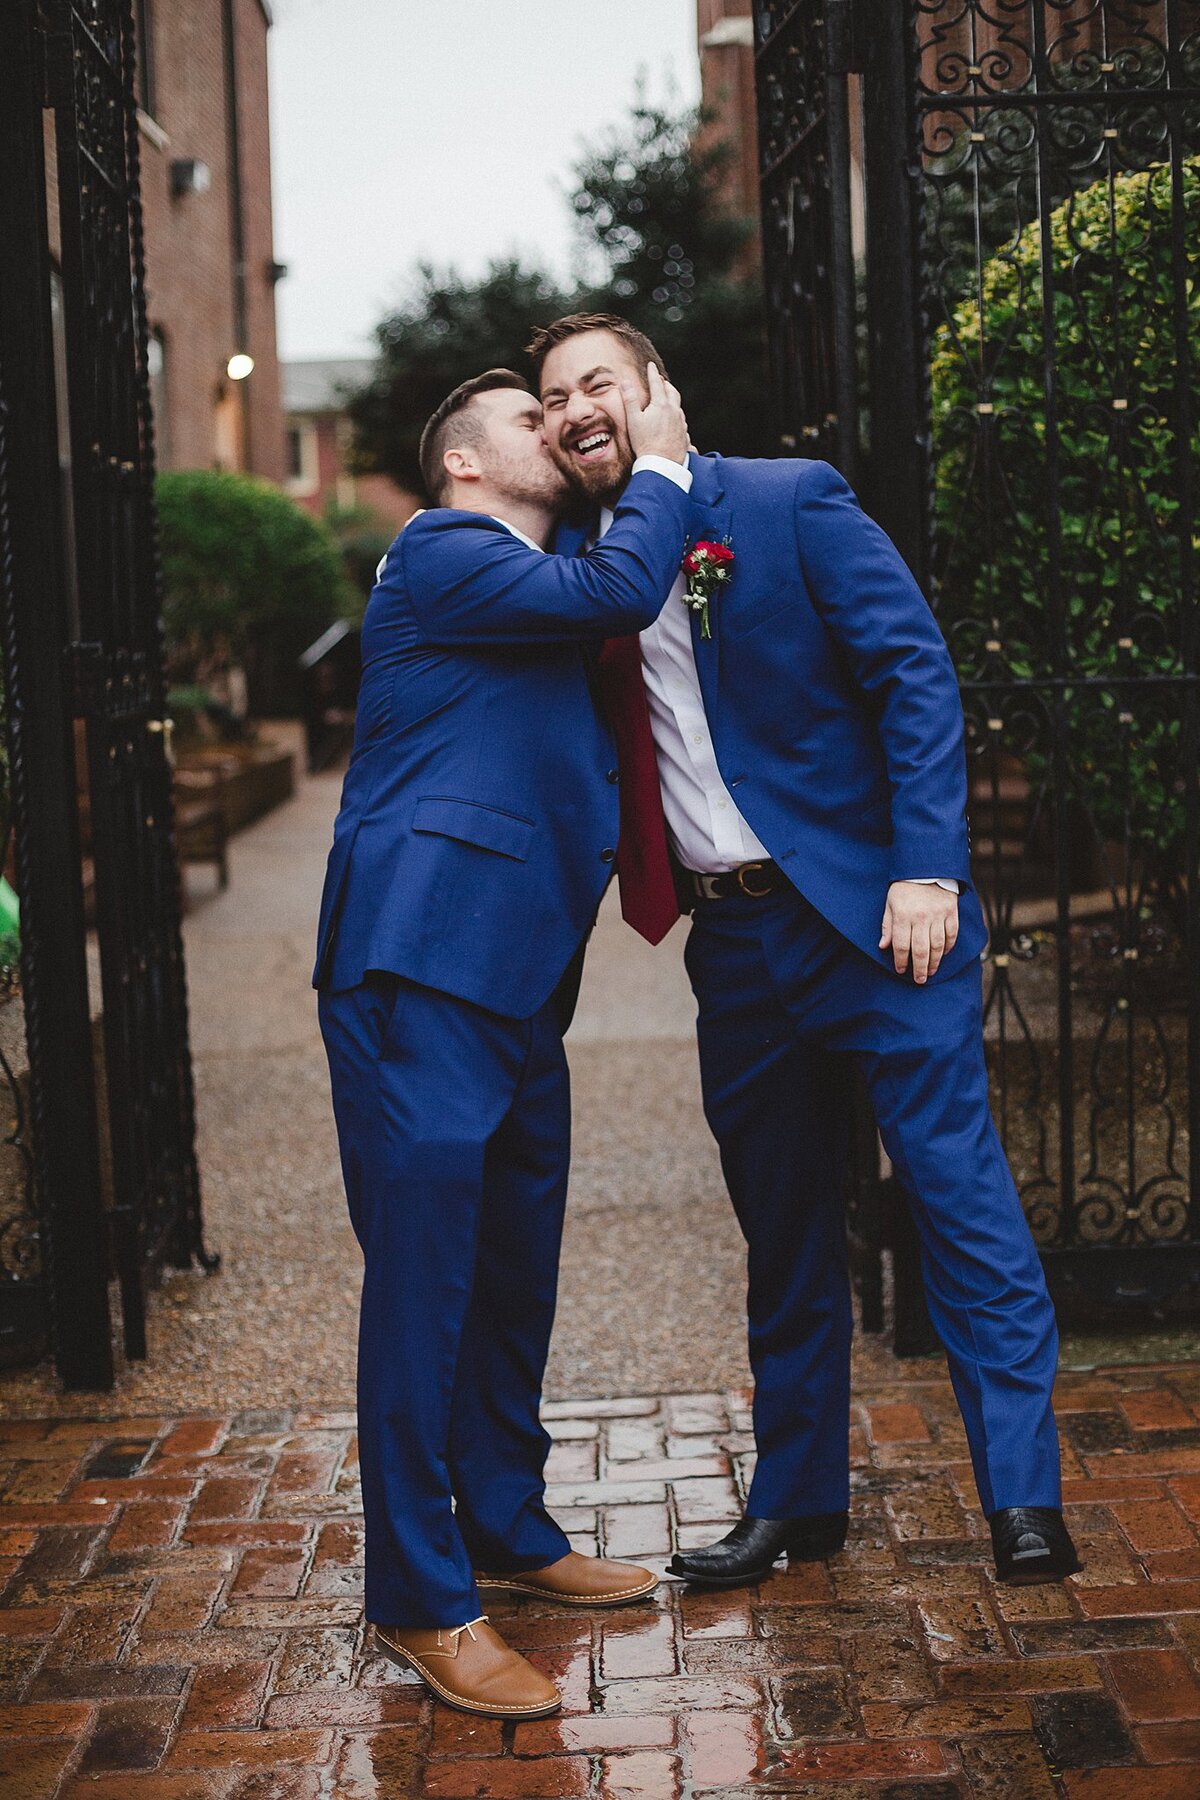 Groom and best man both wearing blue suits with red ties get silly as the best man kisses the groom on the cheek in front of a Nashville church.